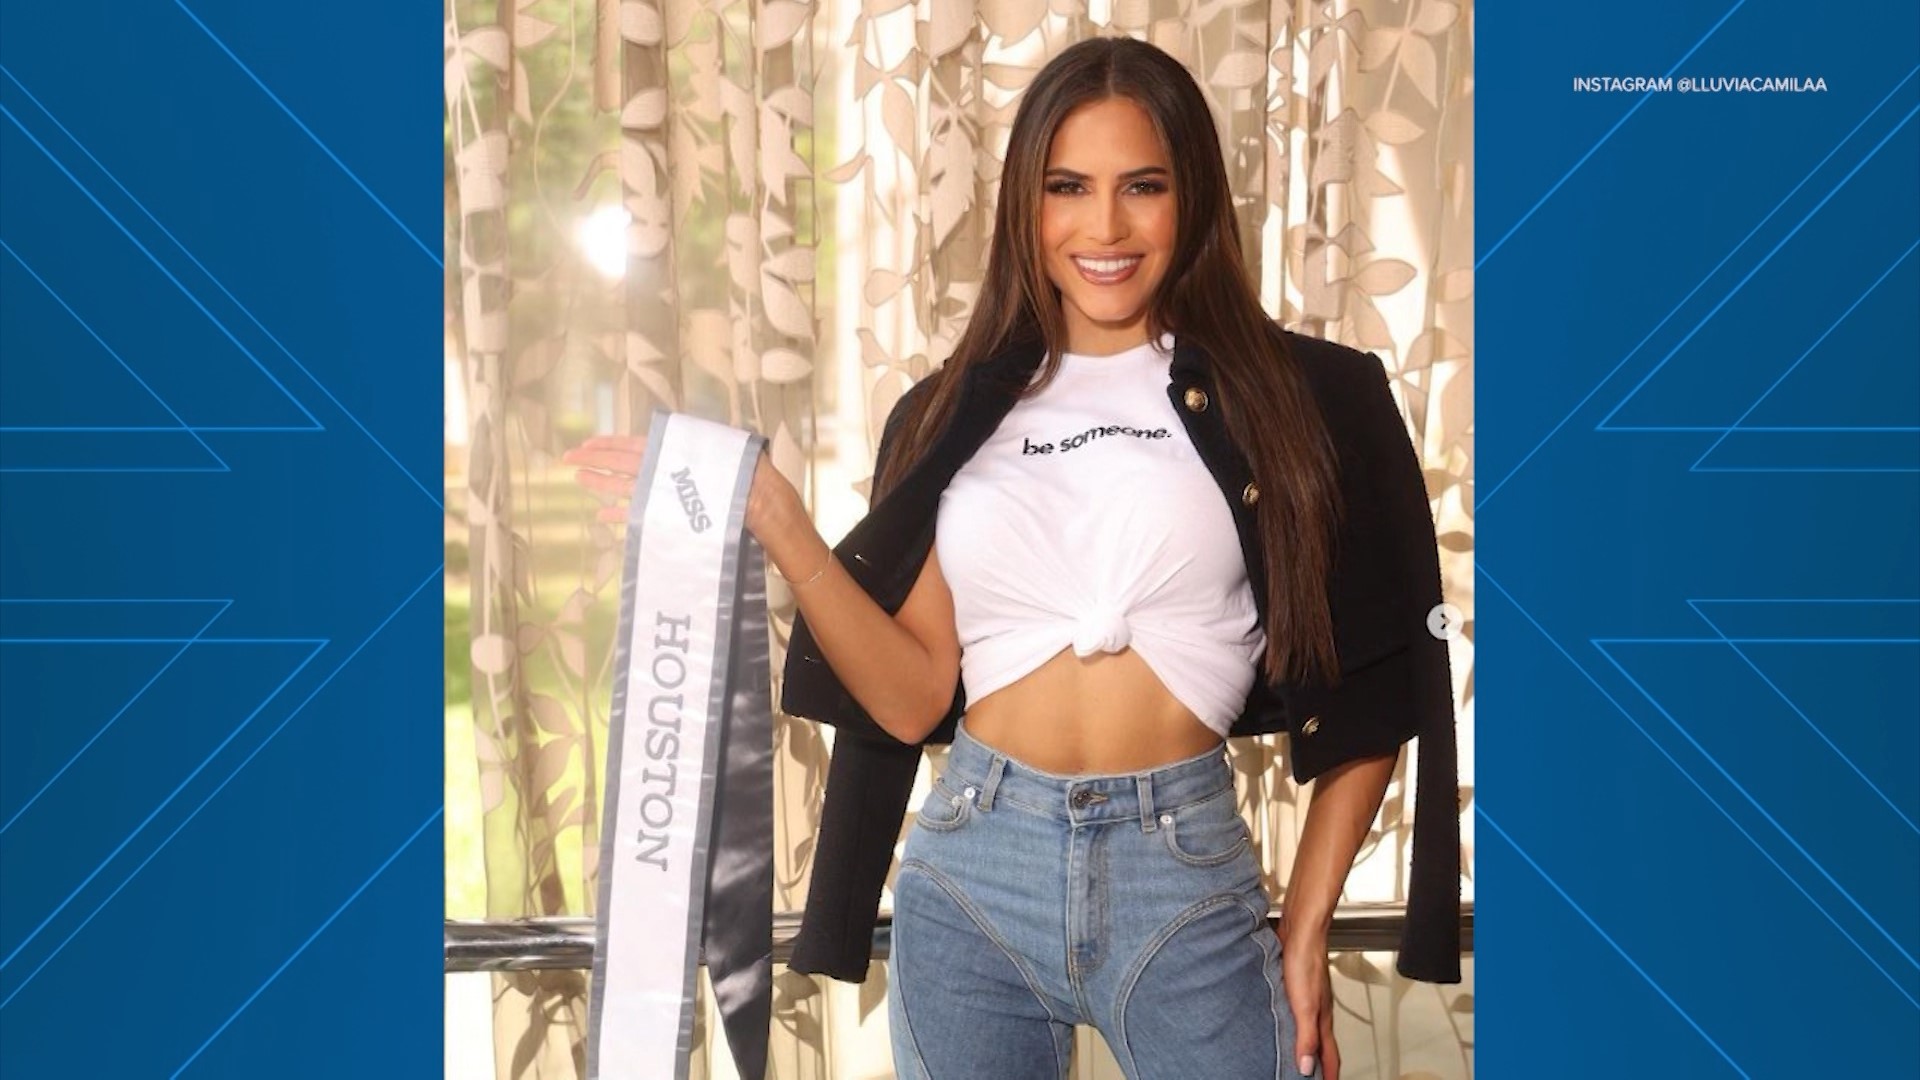 Miss Houston USA 2023 was crowned Miss Texas USA during Saturday's pageant.